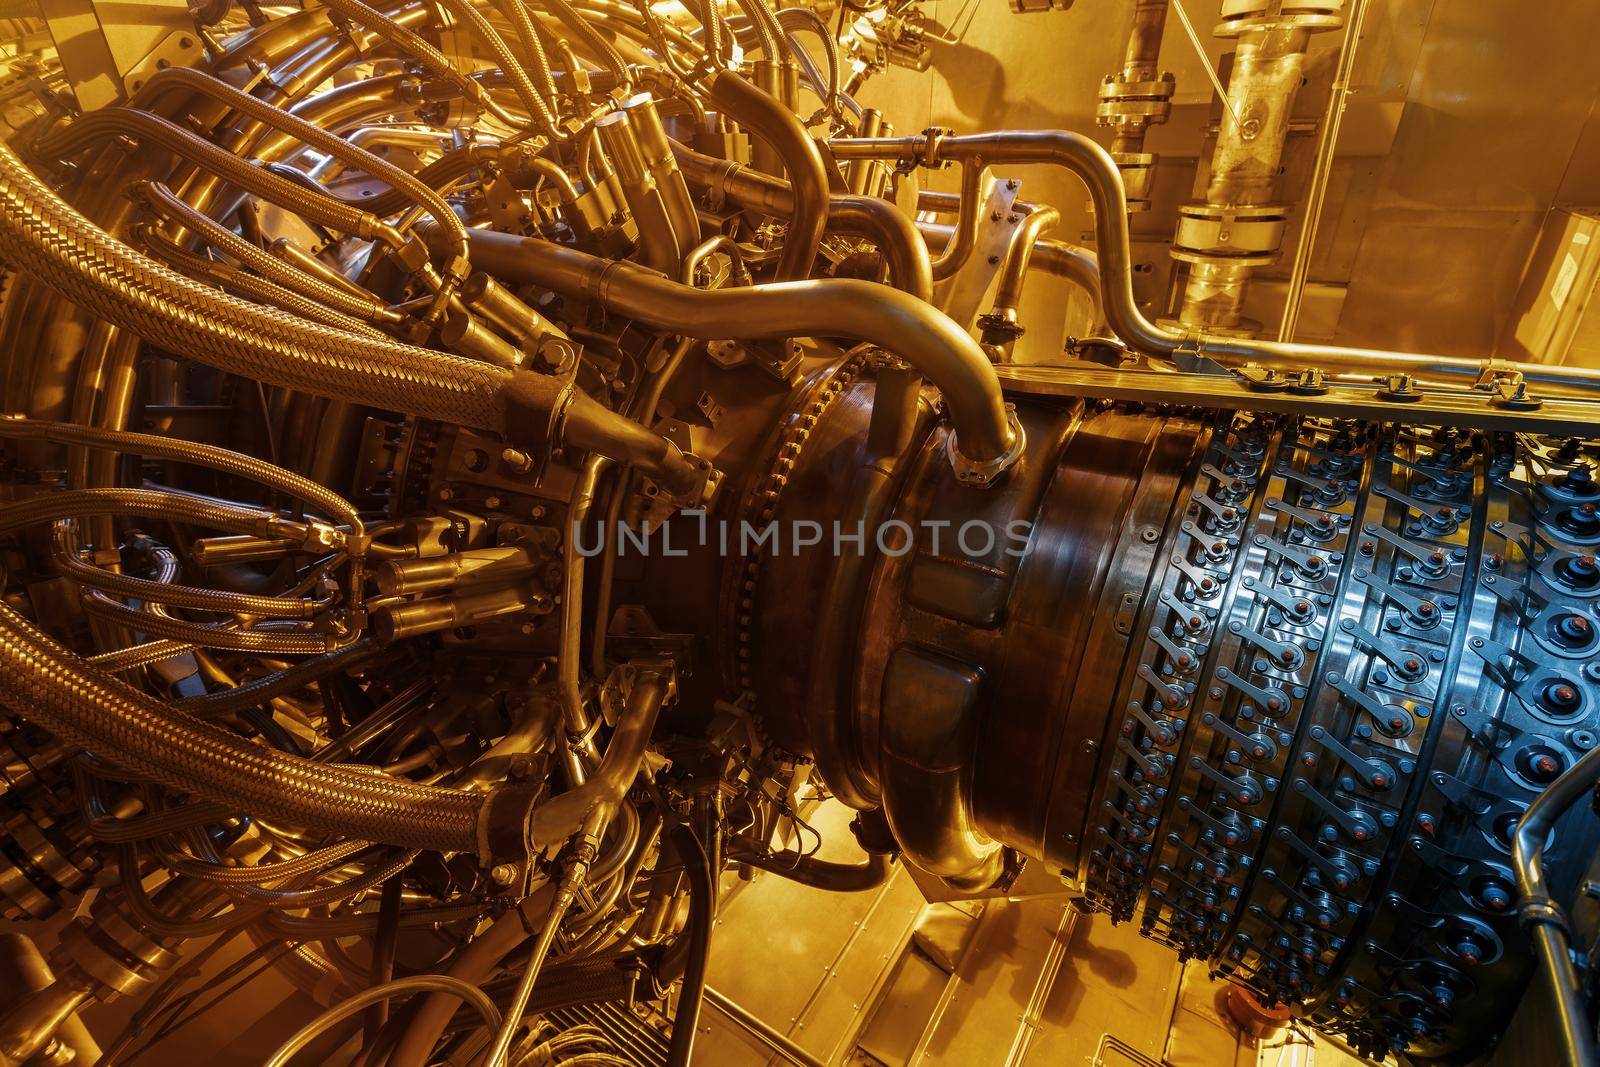 Gas turbine engine of feed gas compressor located inside pressurized enclosure, The gas turbine engine used in offshore oil and gas central processing platform. by AlexGrec